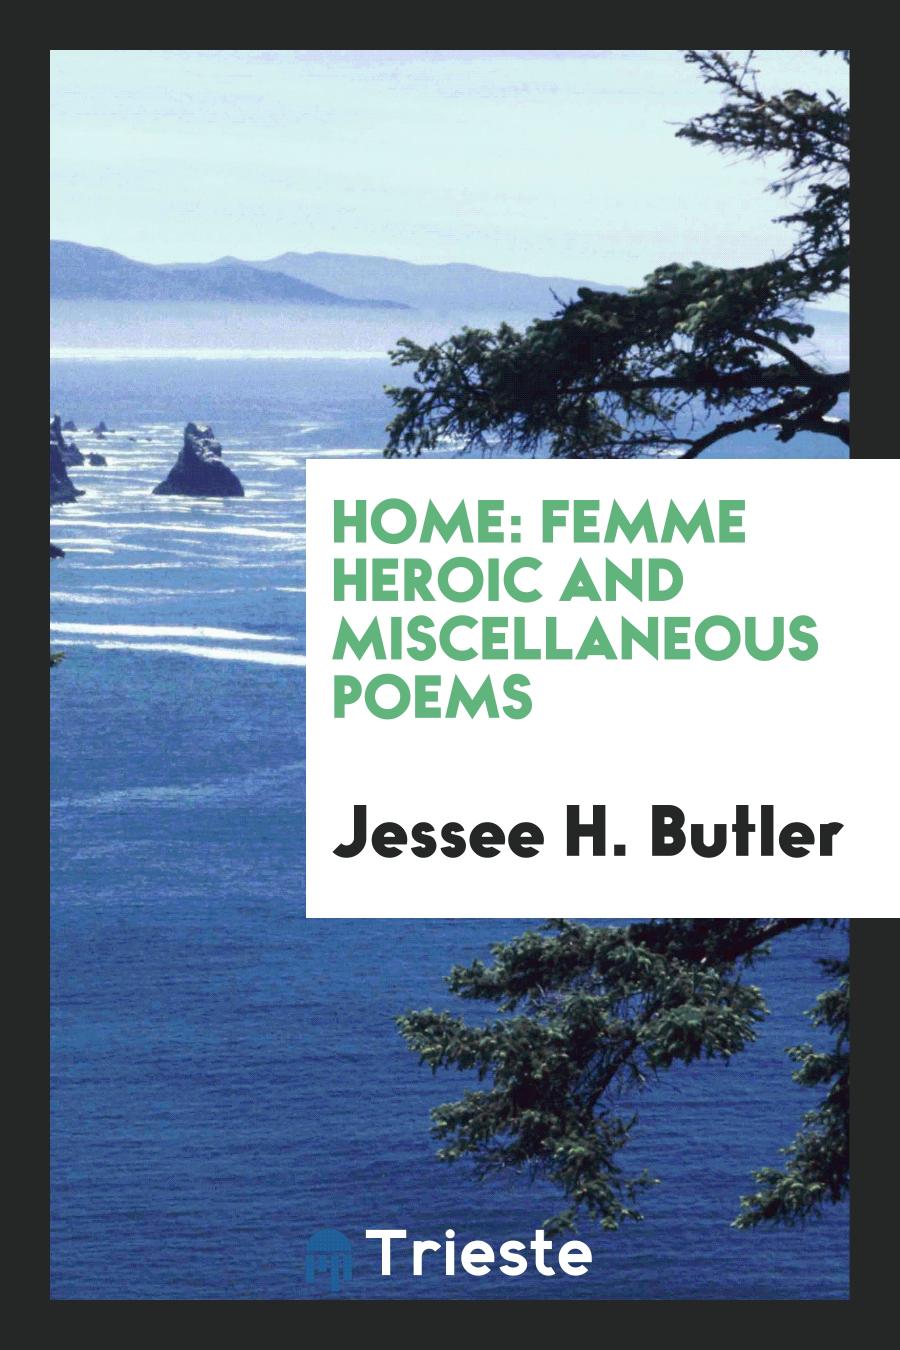 Home: Femme Heroic and Miscellaneous Poems